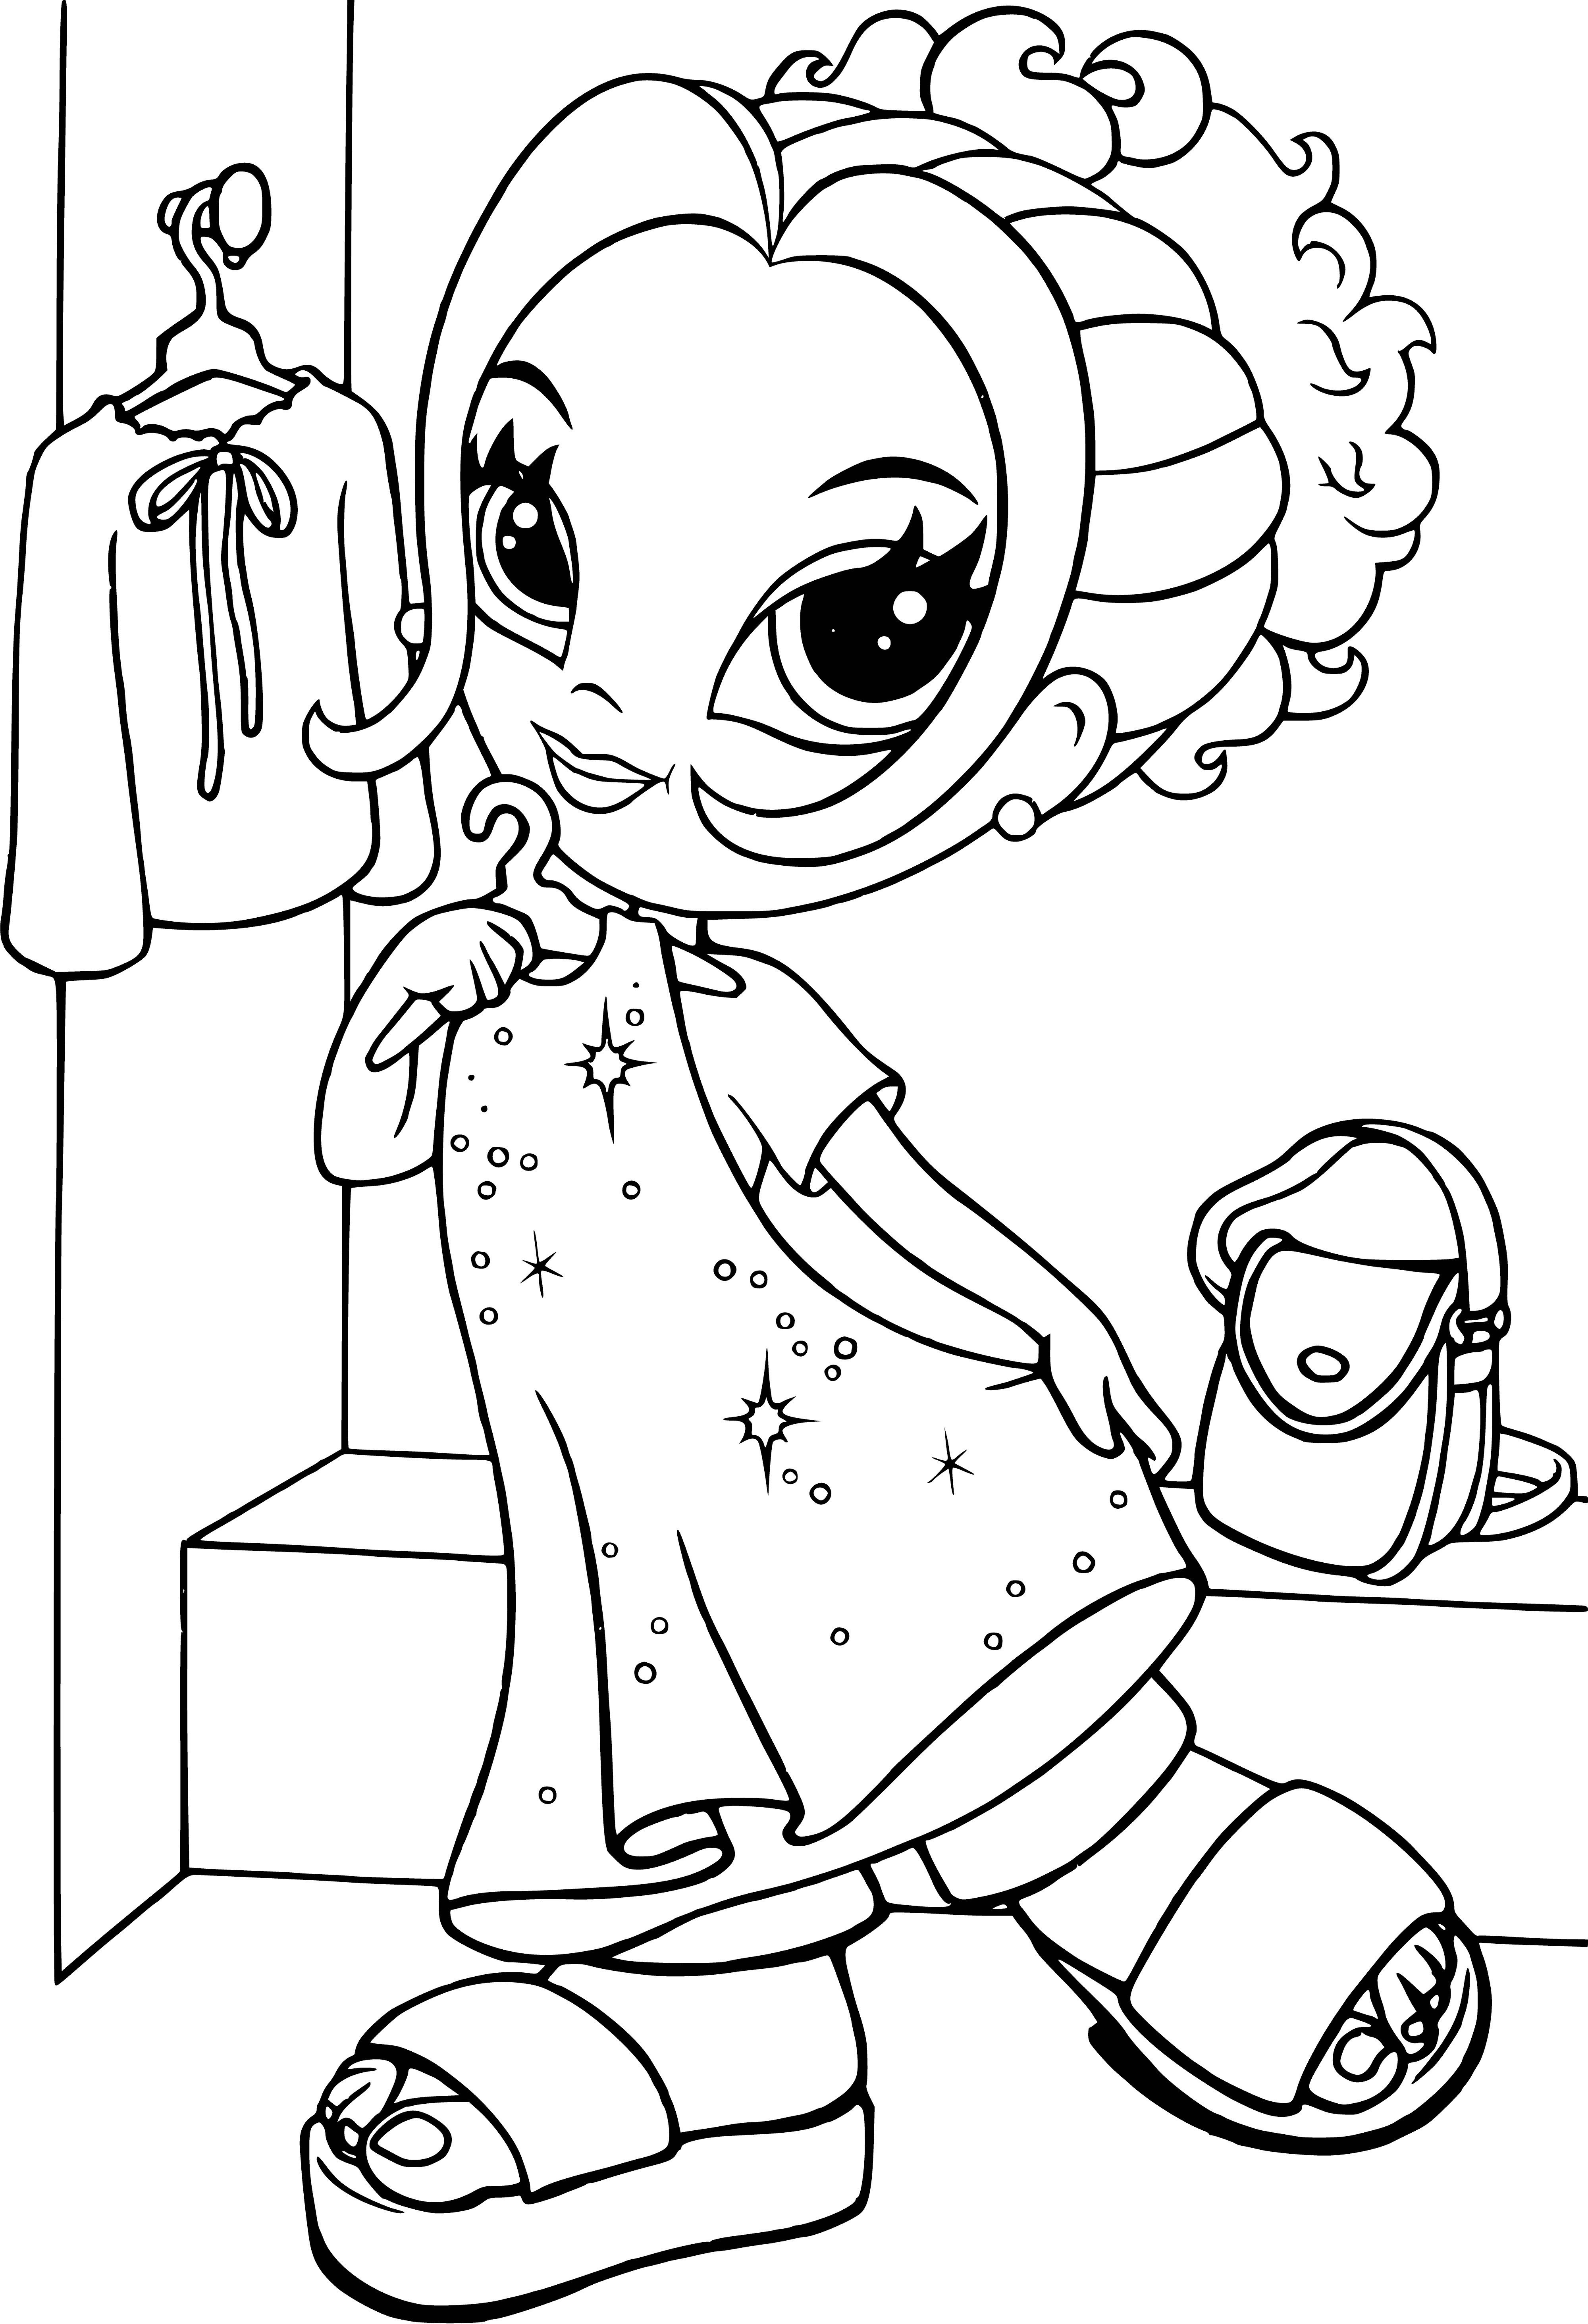 coloring page: Young woman looking confident, poised and ready to dance in a strapless dress, long blonde curls and a sparkle in her eyes. #Blessed